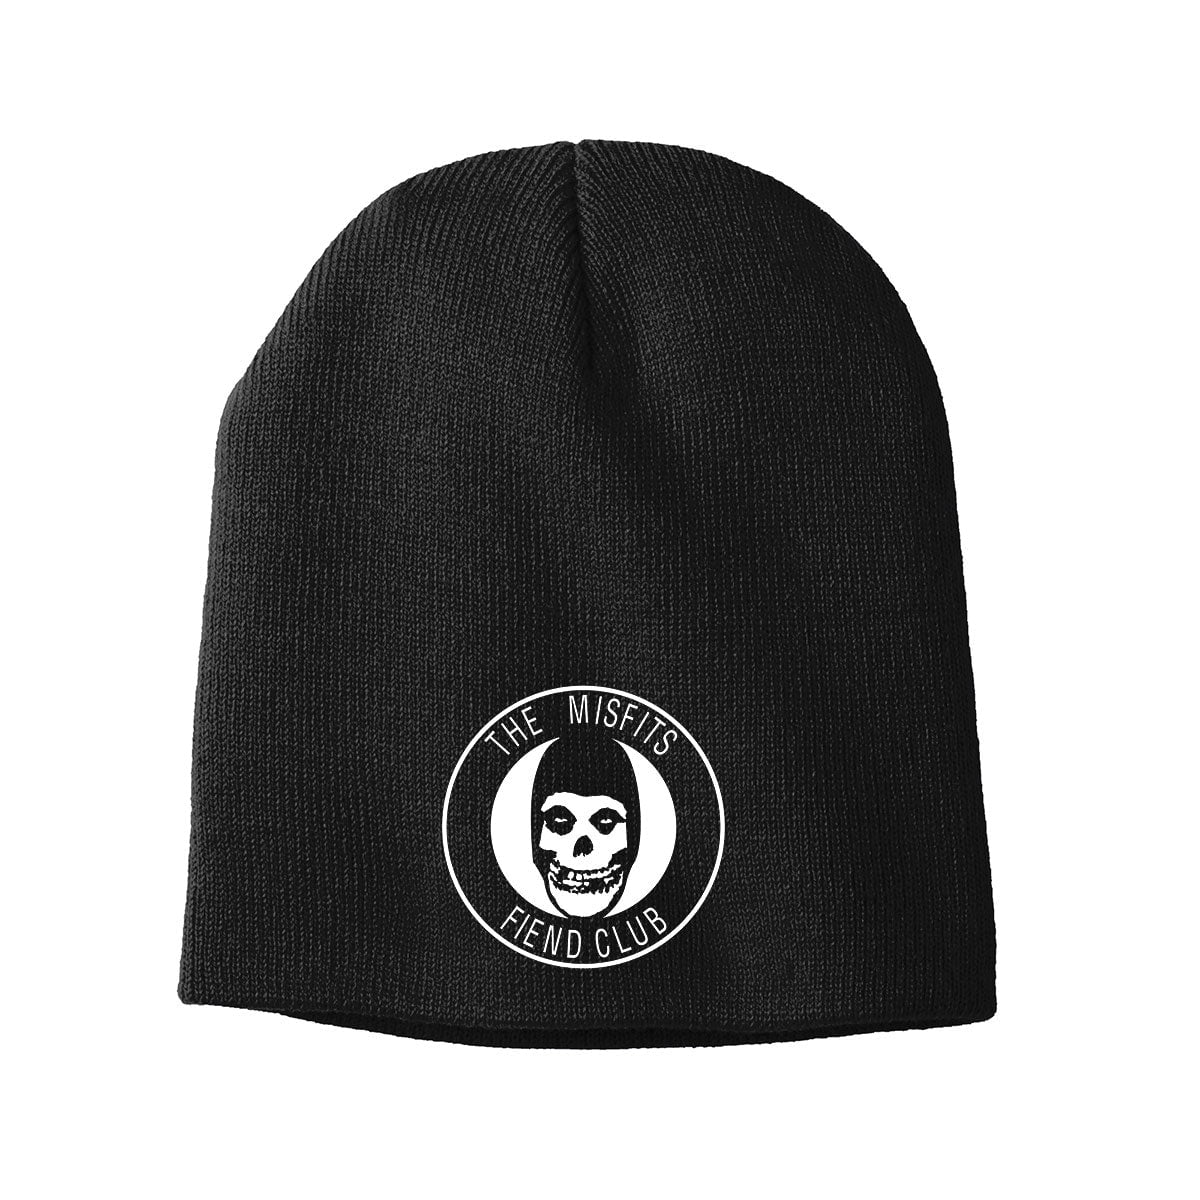 Beanie One Size Fits All Misfits Fiend Club Embroidered Official Beanie